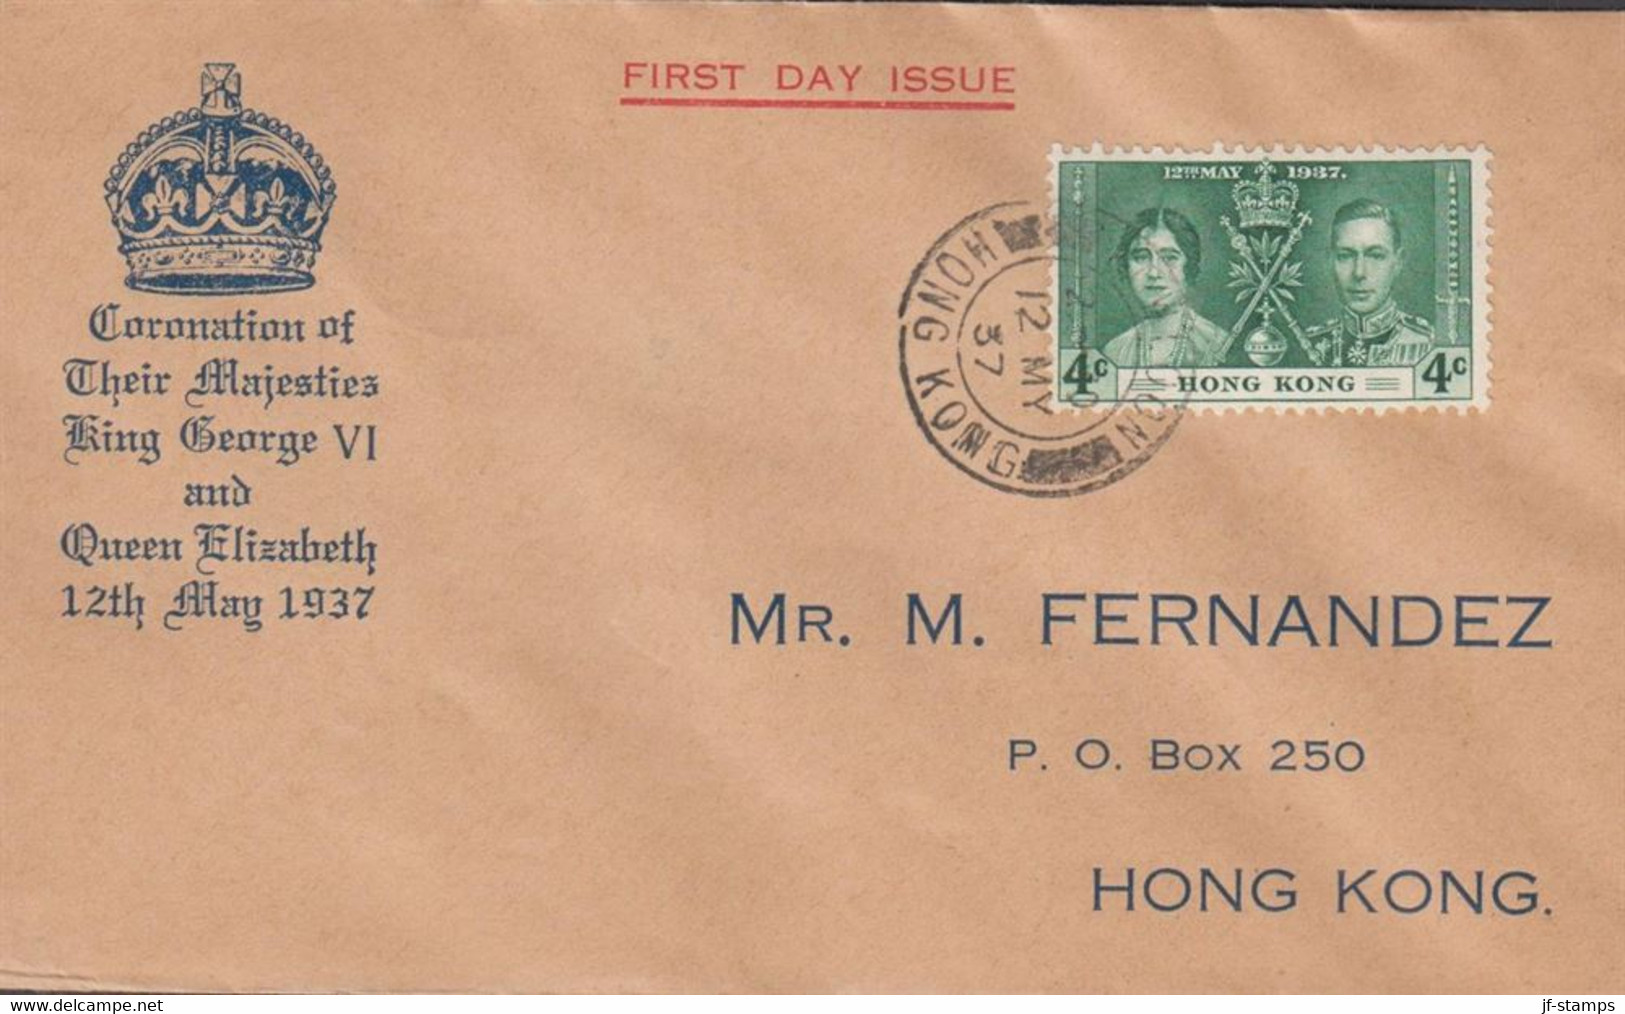 1937. HONG KONG Georg VI. 4 C Coronation On Nice FDC Cancelled FIRST DAY OF ISSUE KOWLOON HON... (Michel 136) - JF427050 - Lettres & Documents